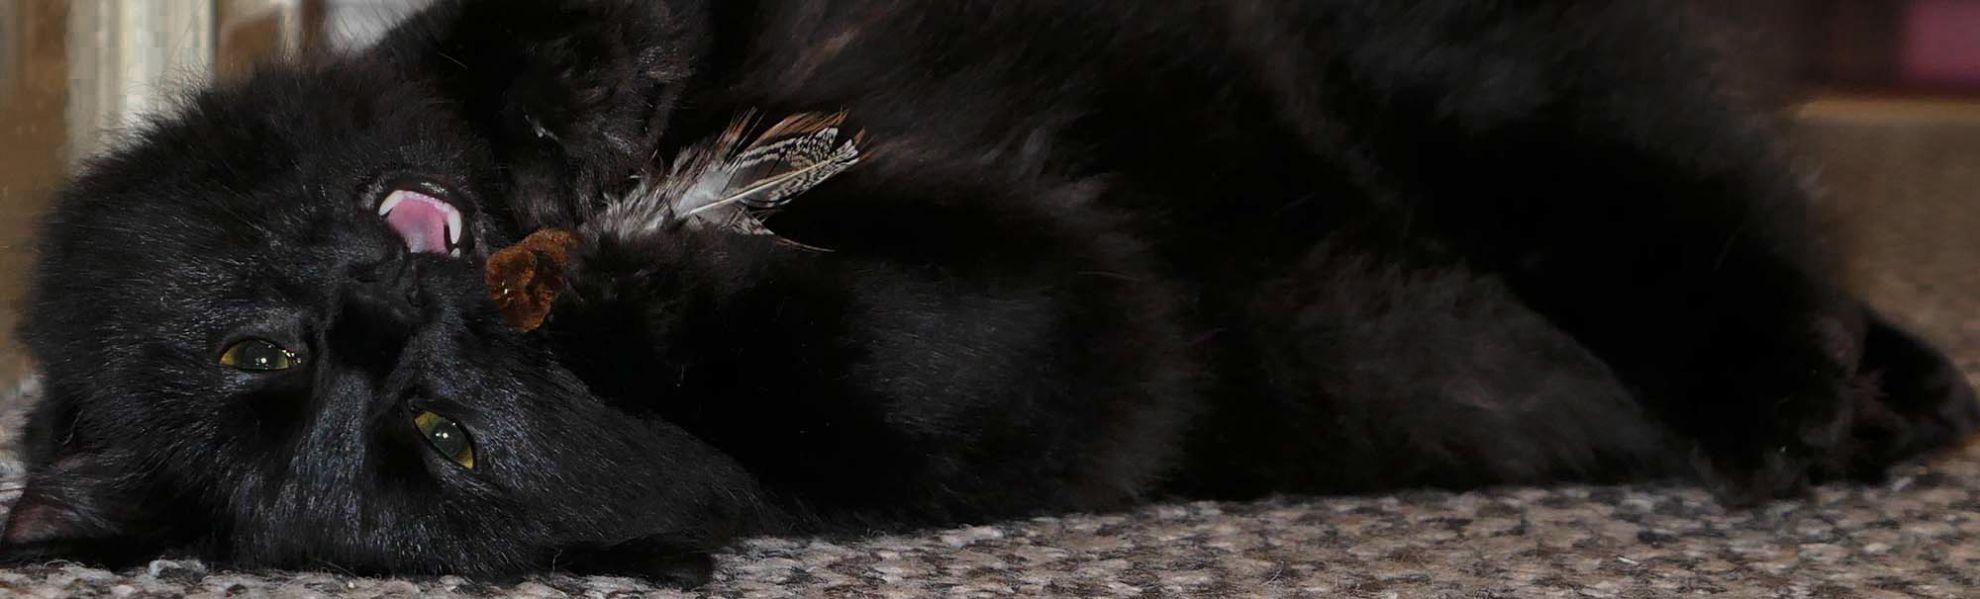 Black cat chewing a handmade feather teaser.